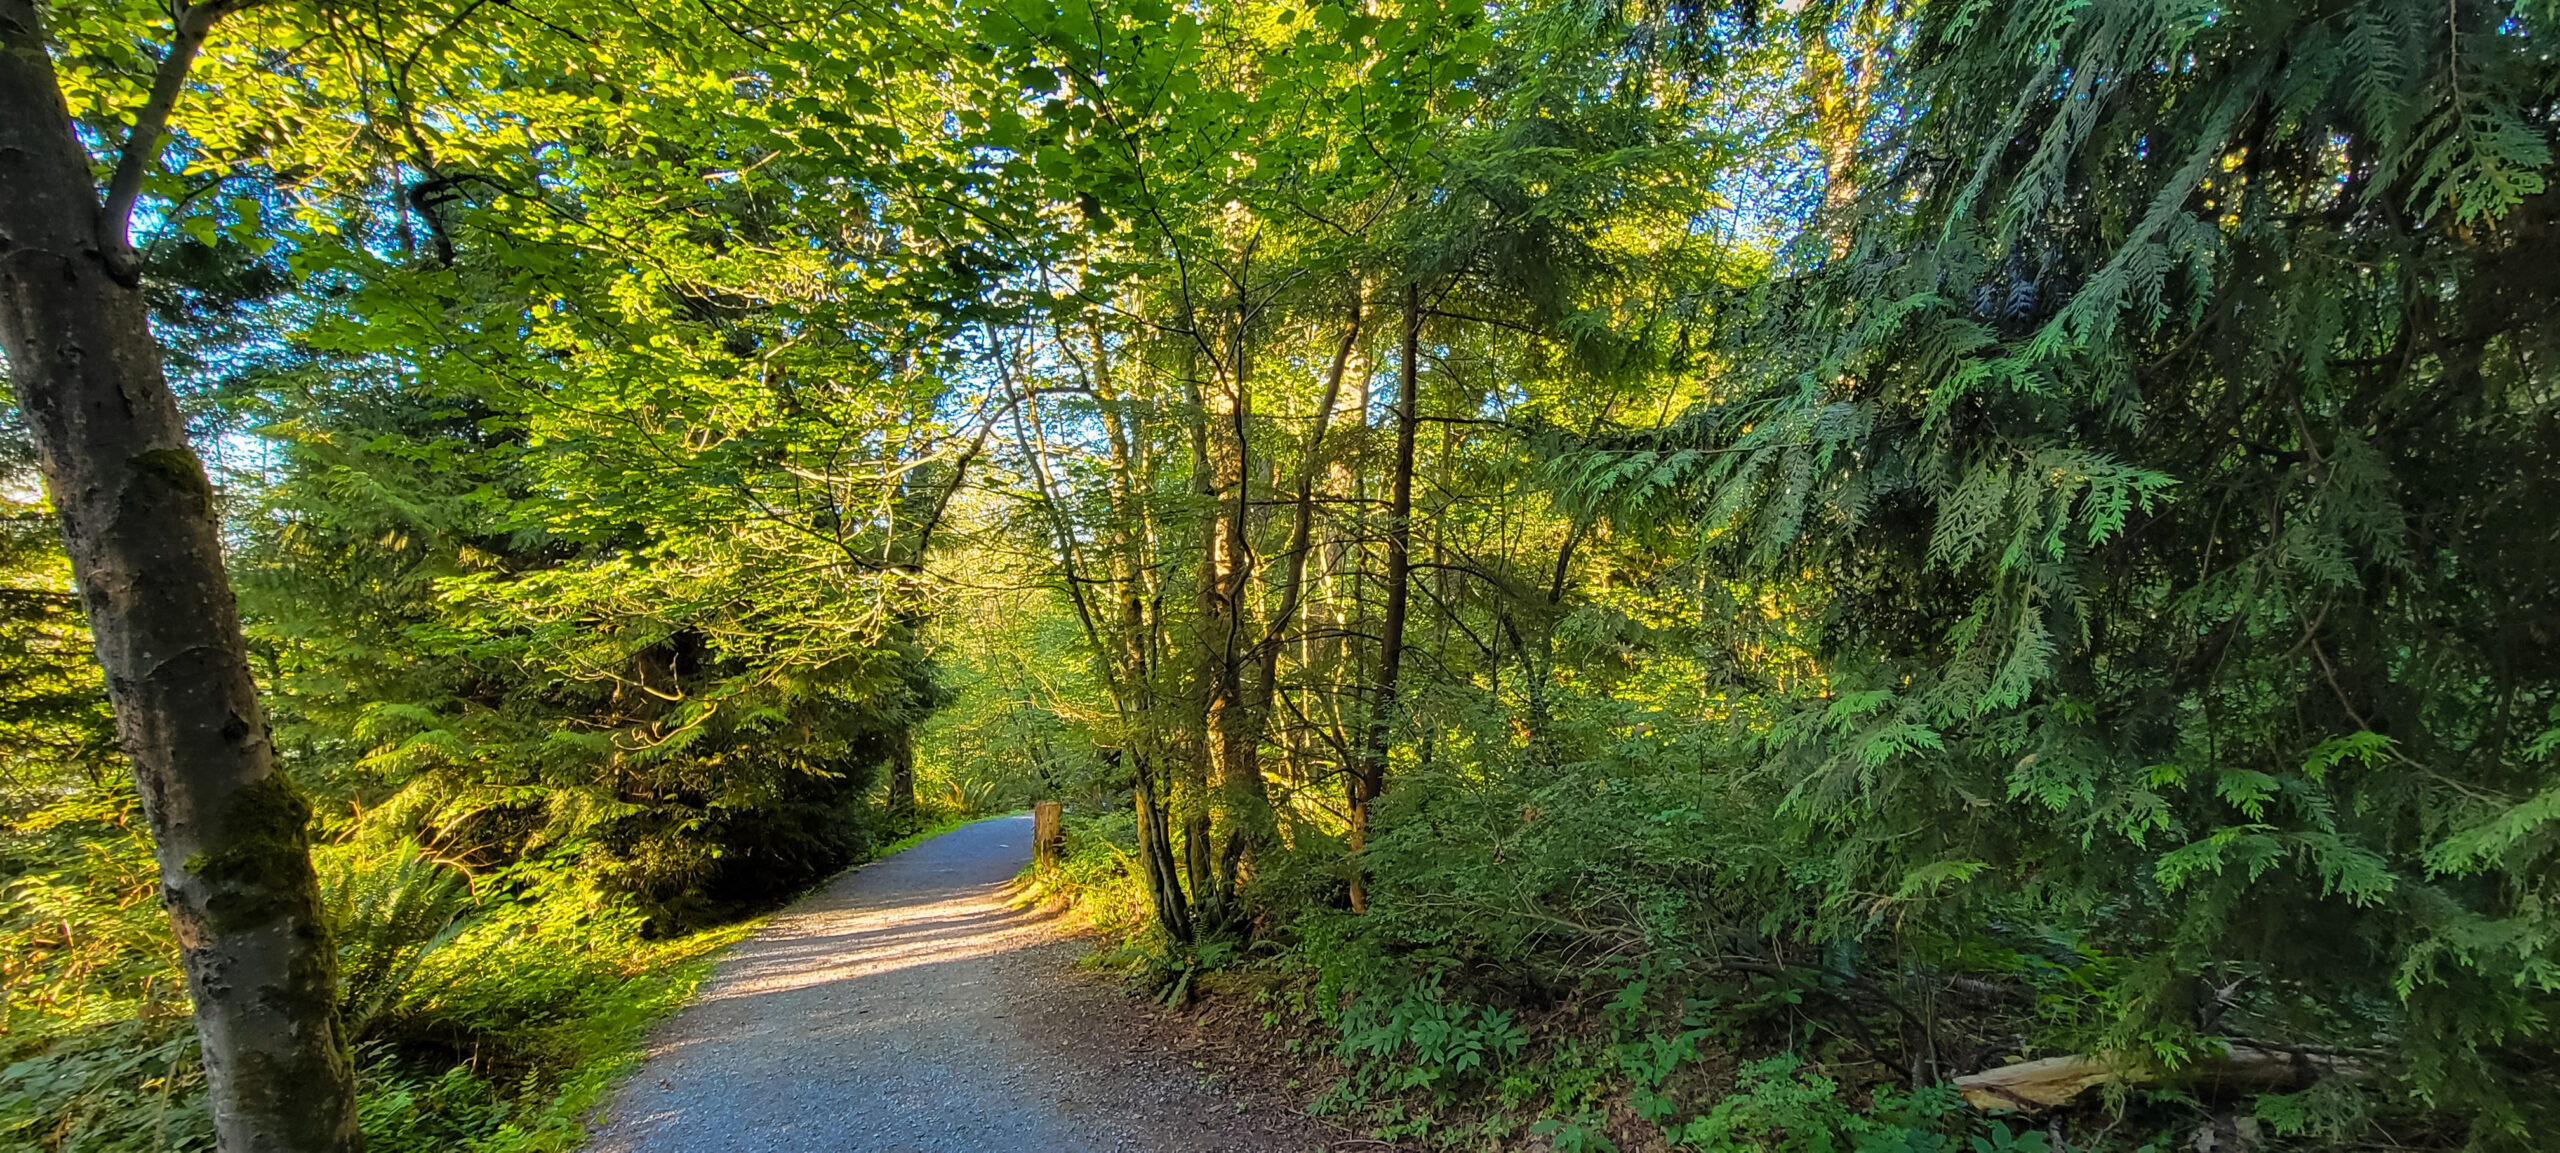 The picture is of a trail on Burnaby Mountain. Both sides of the trail are filled with bright greenery and trees. The sun is shining through the trees onto the gravel path.